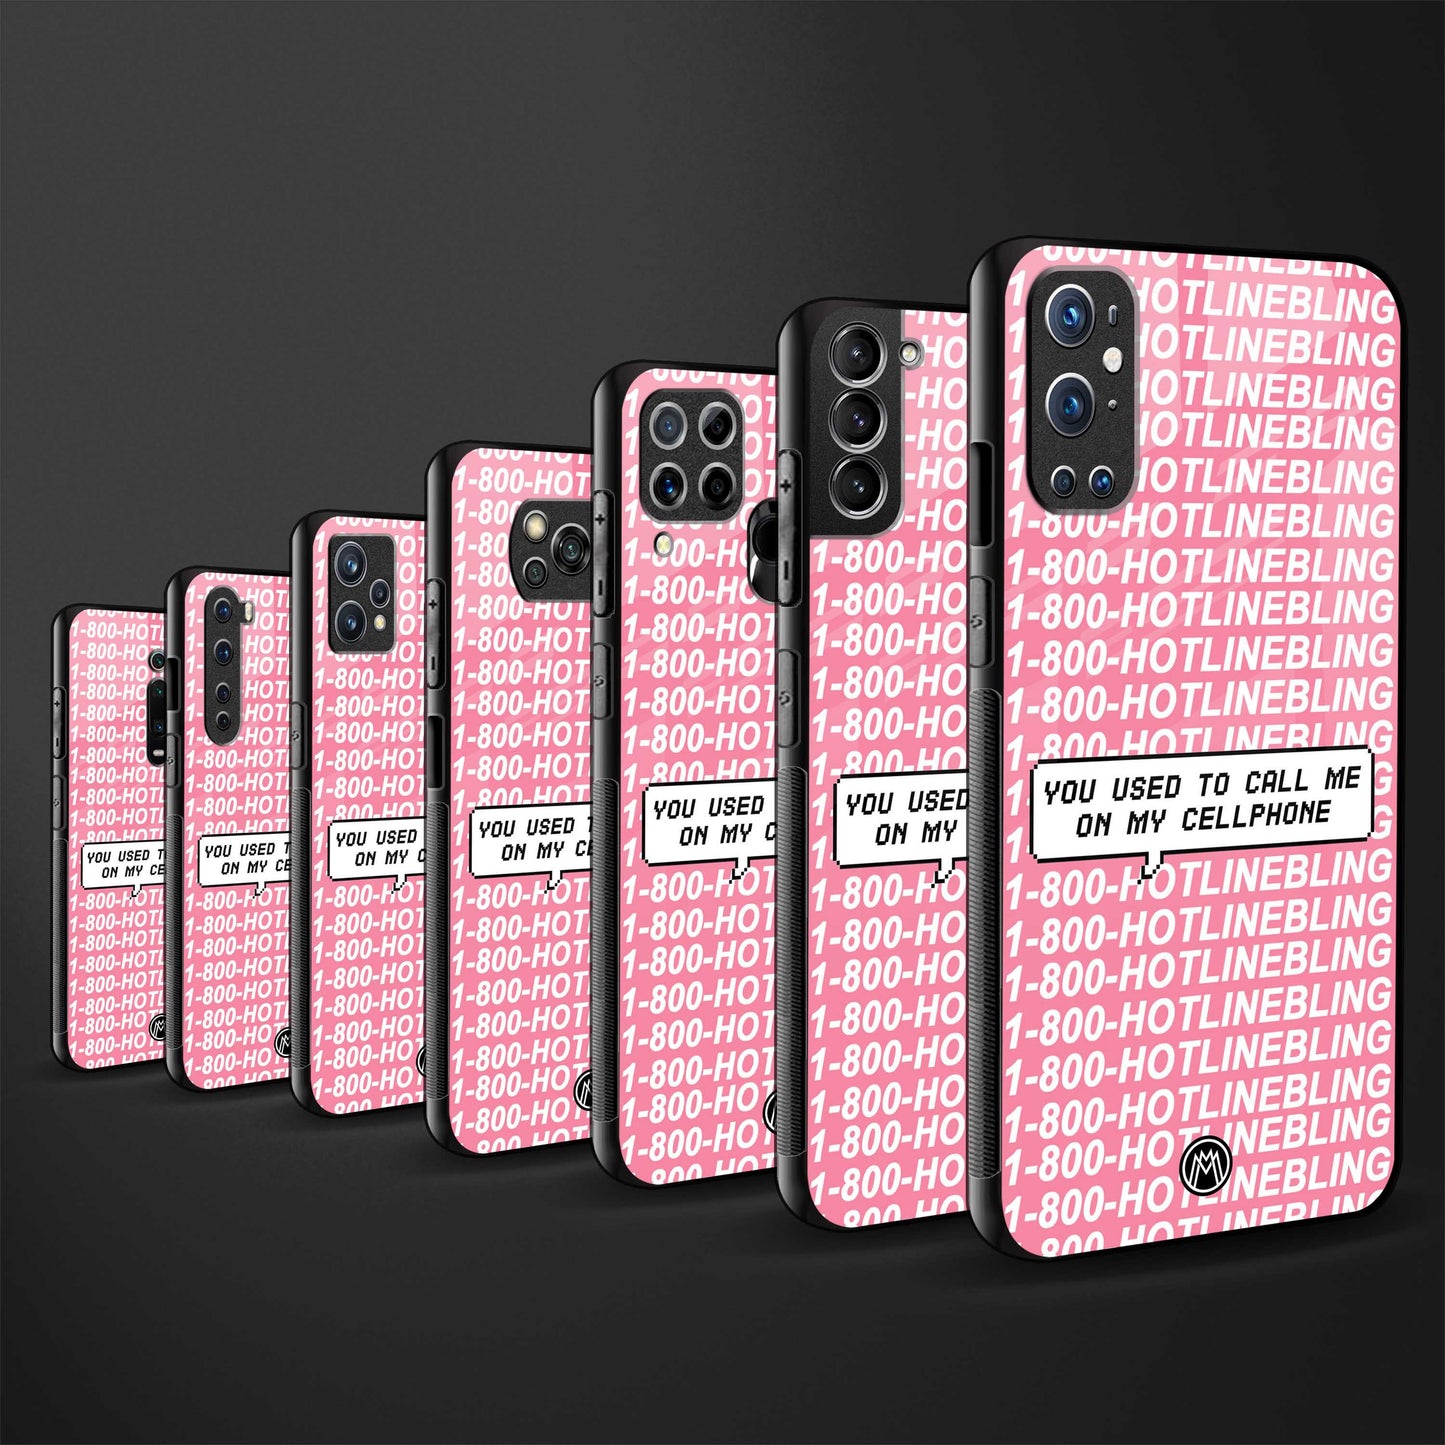 1800 hotline bling phone cover for realme c11 